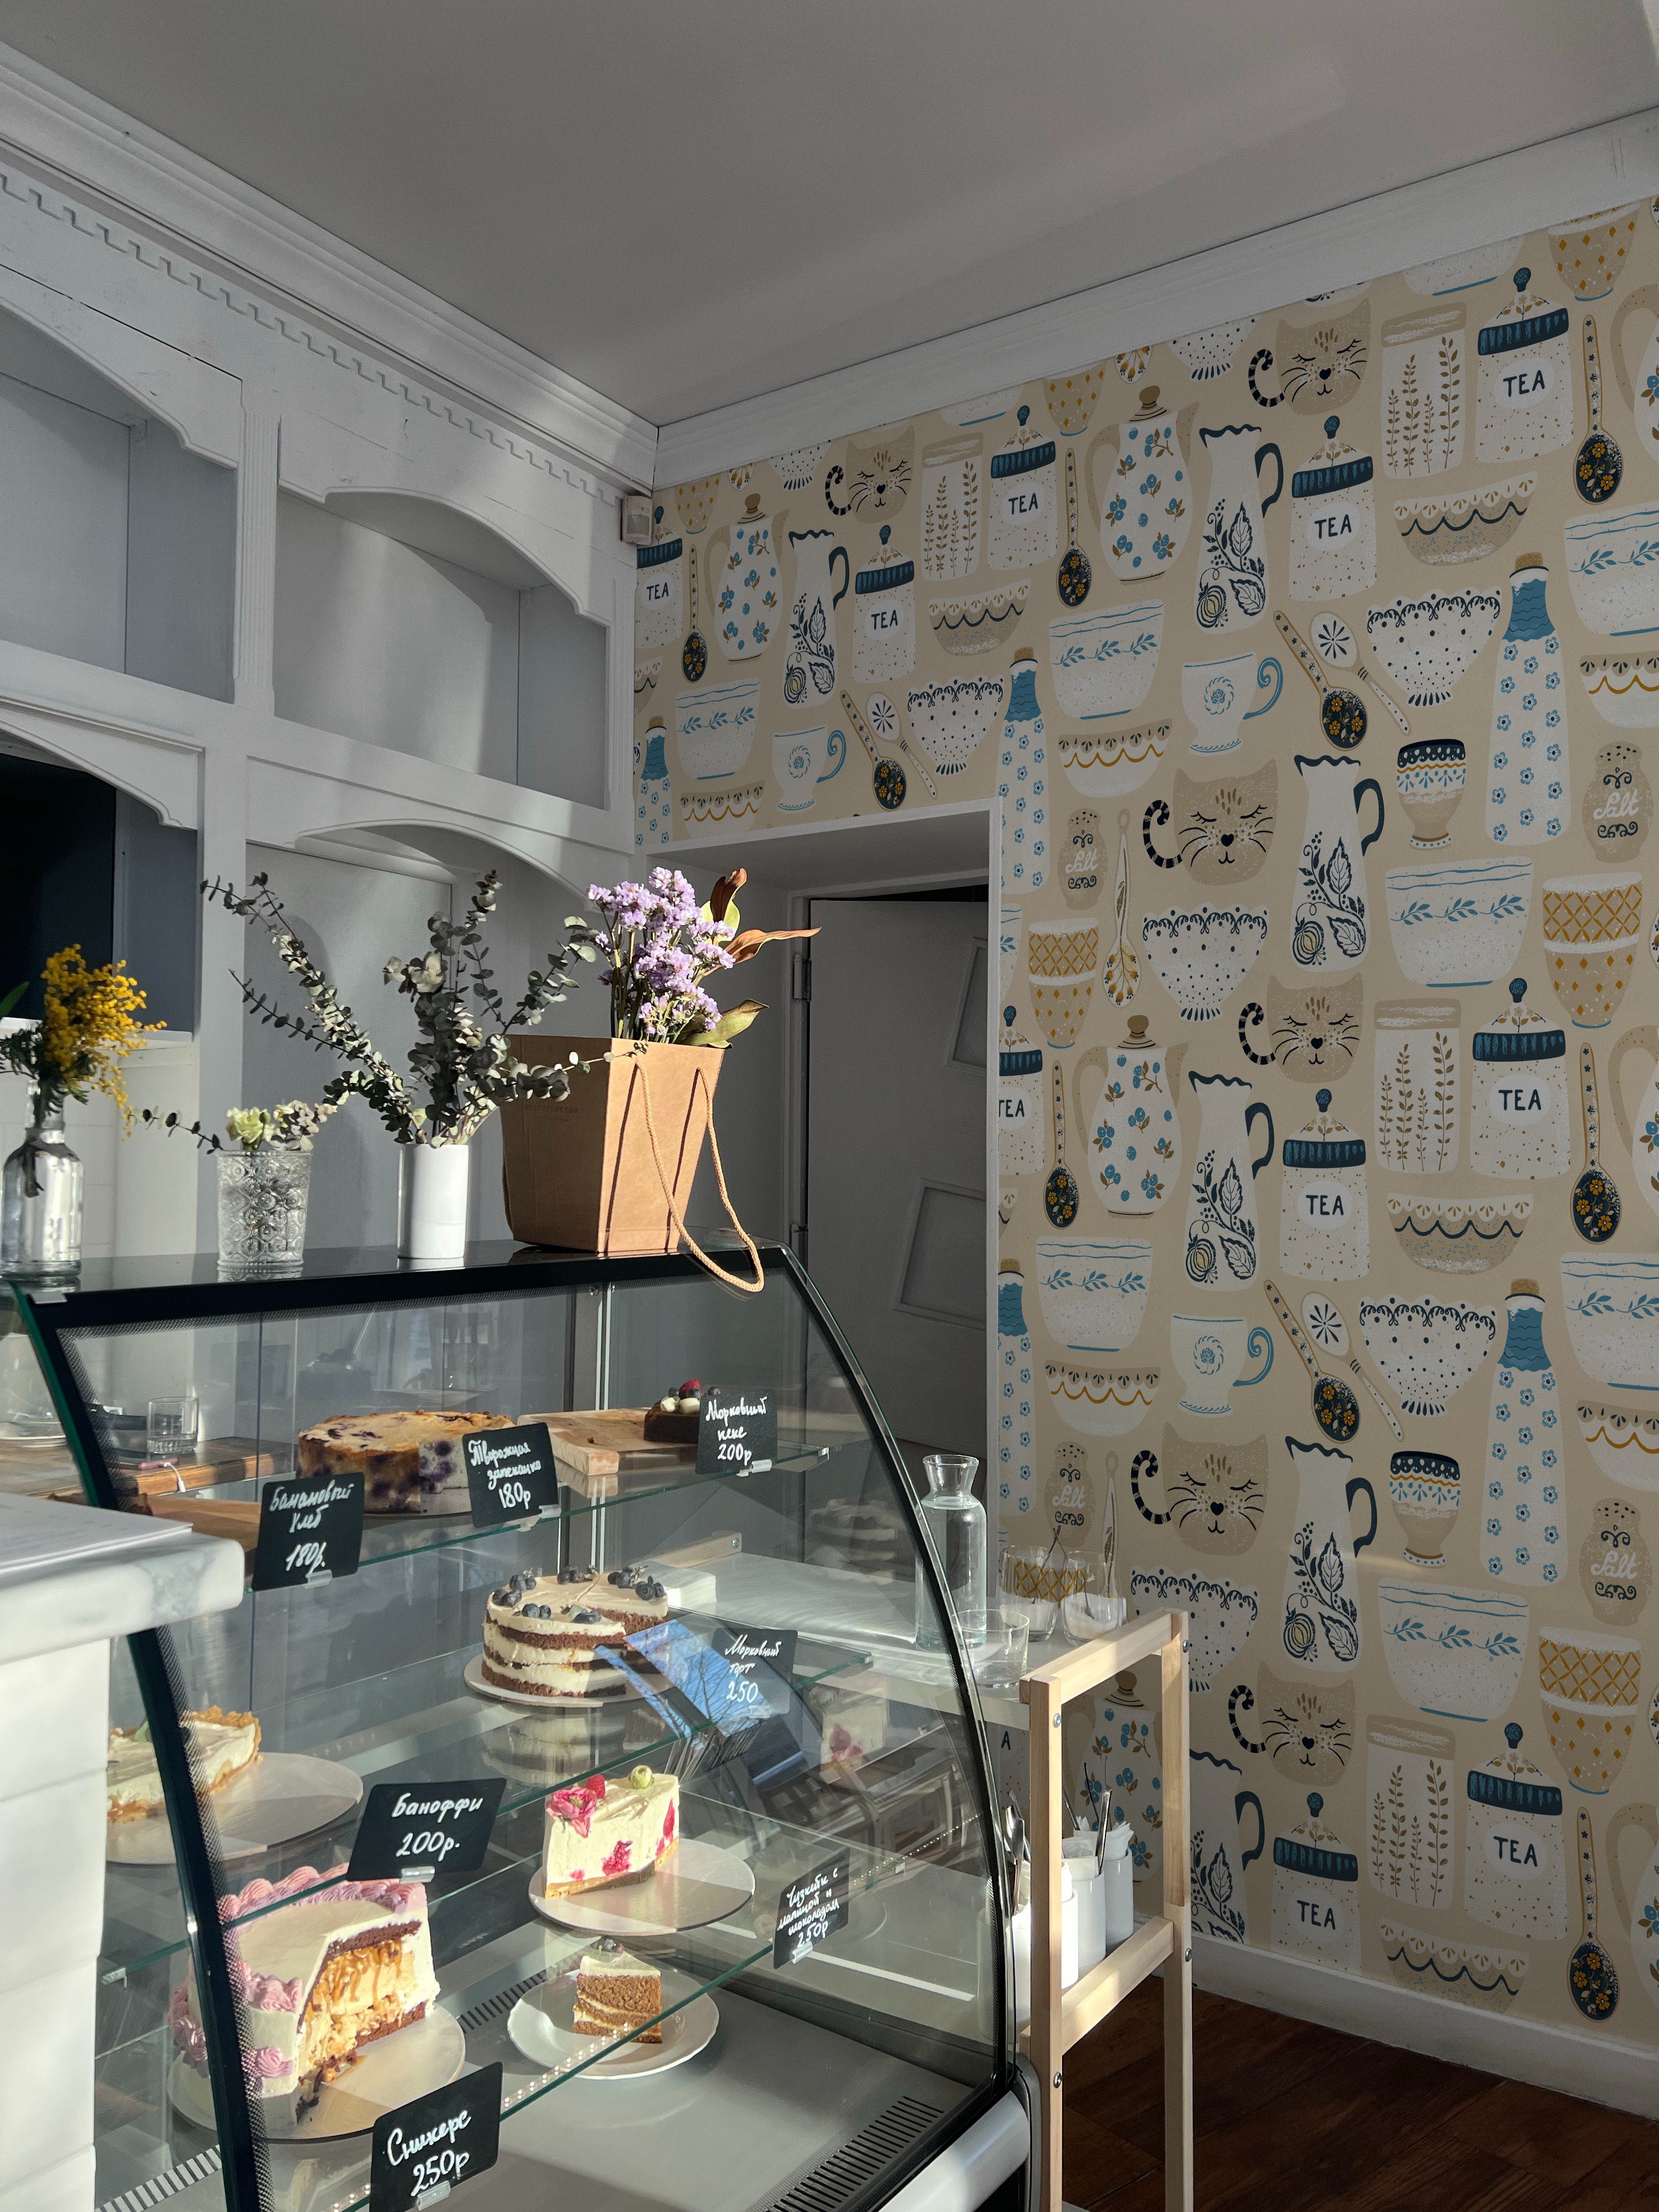 A cozy interior of a cafe with stylish decor, featuring walls adorned with 'Spring Ceramics Wallpaper'. The wallpaper displays charming illustrations of teapots, teacups, and other ceramics in soft blue, beige, and yellow tones. A glass display counter showcases a variety of appealing cakes and desserts, enhancing the warm and inviting atmosphere.